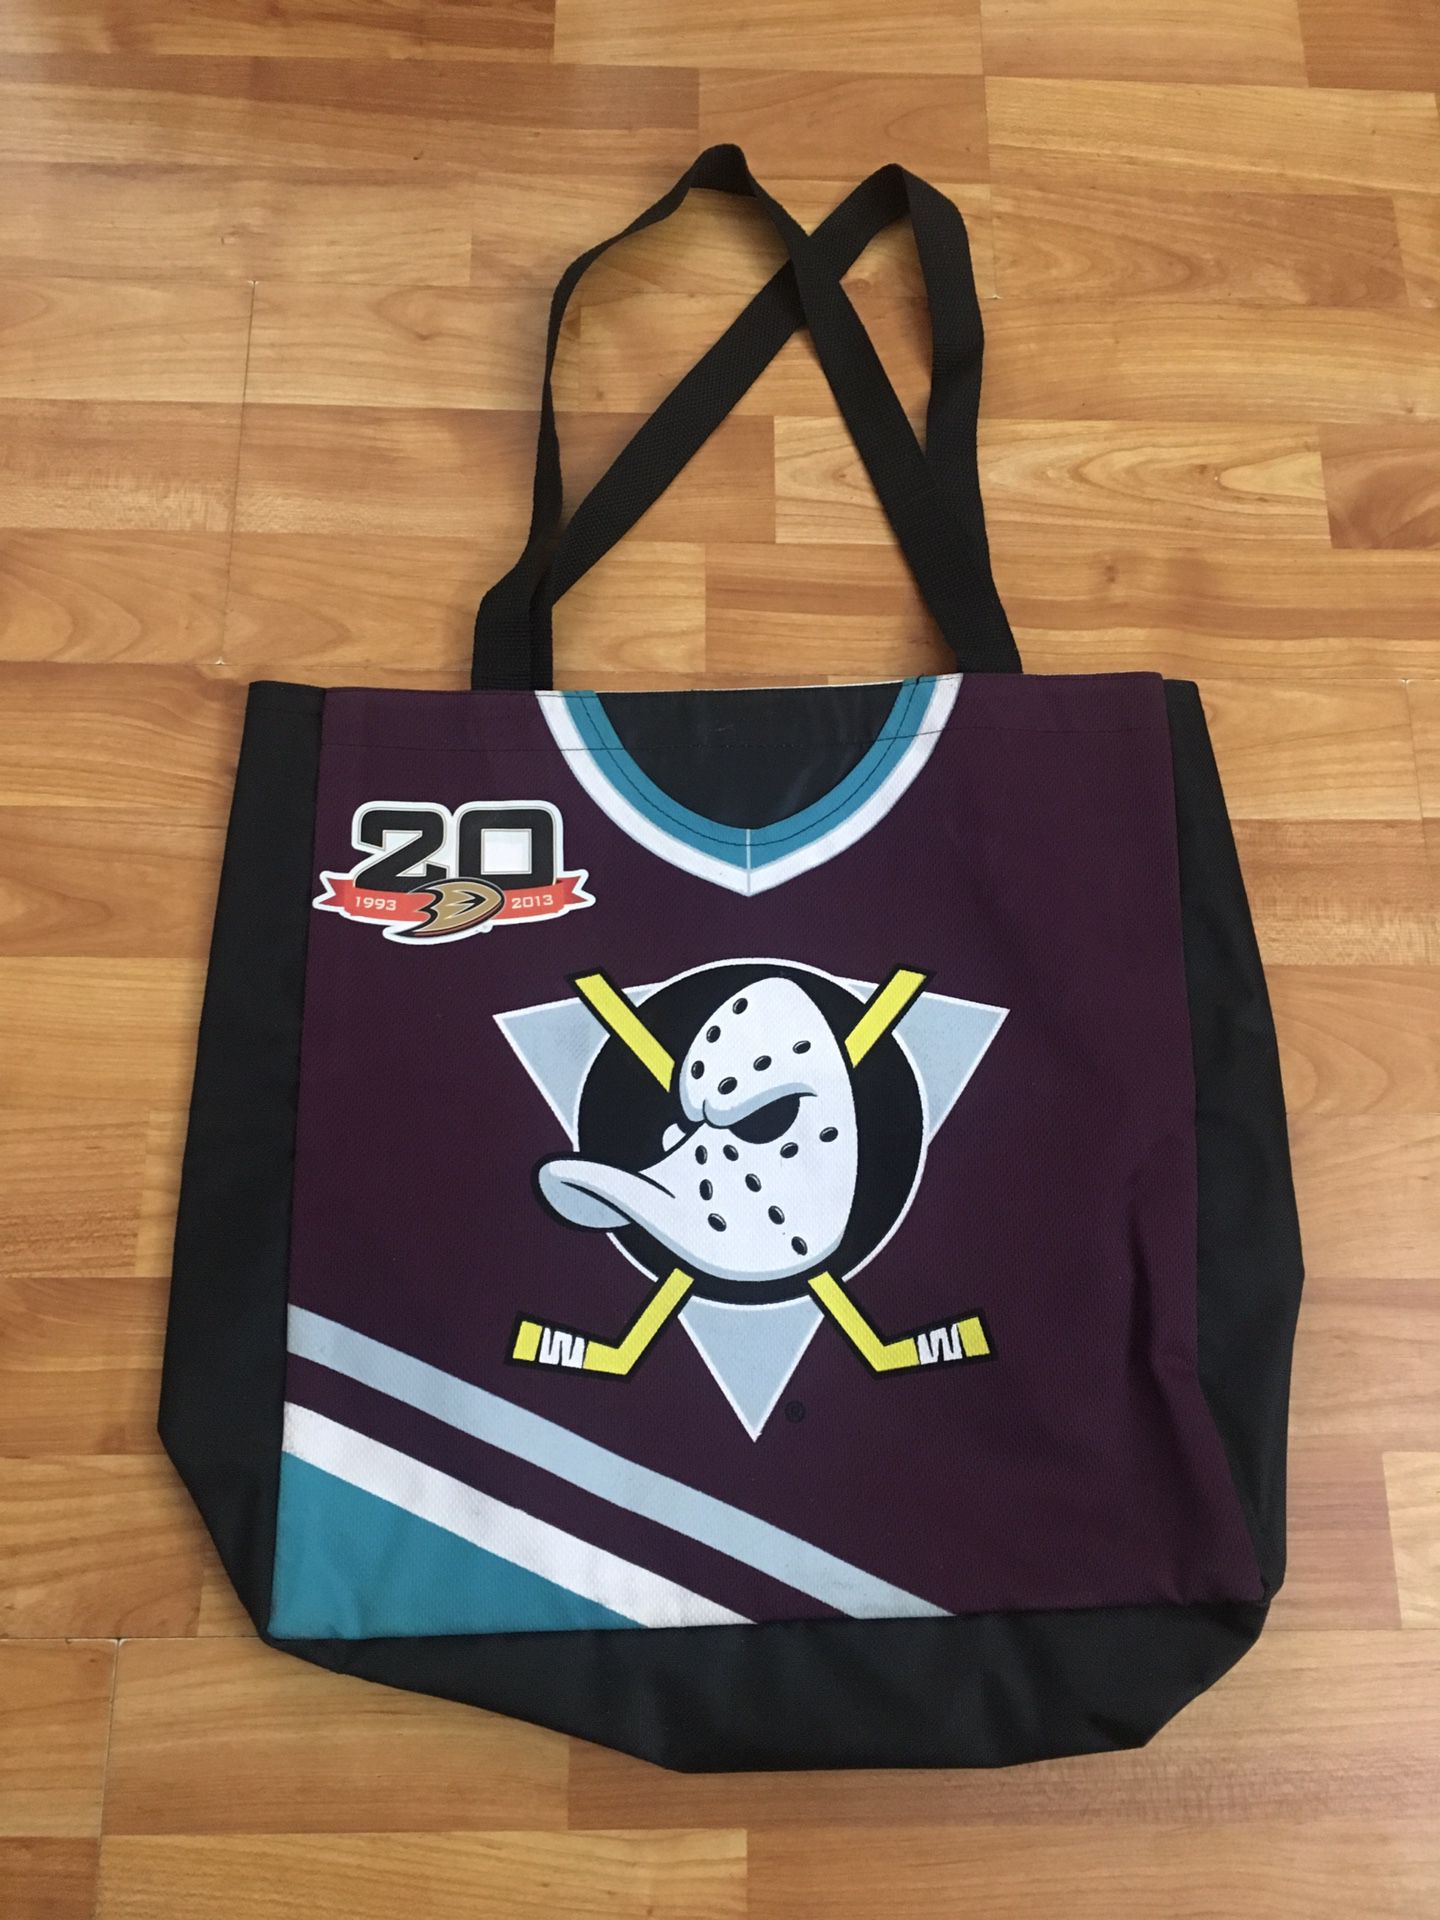 Anaheim Mighty Ducks 2 sided tote bag